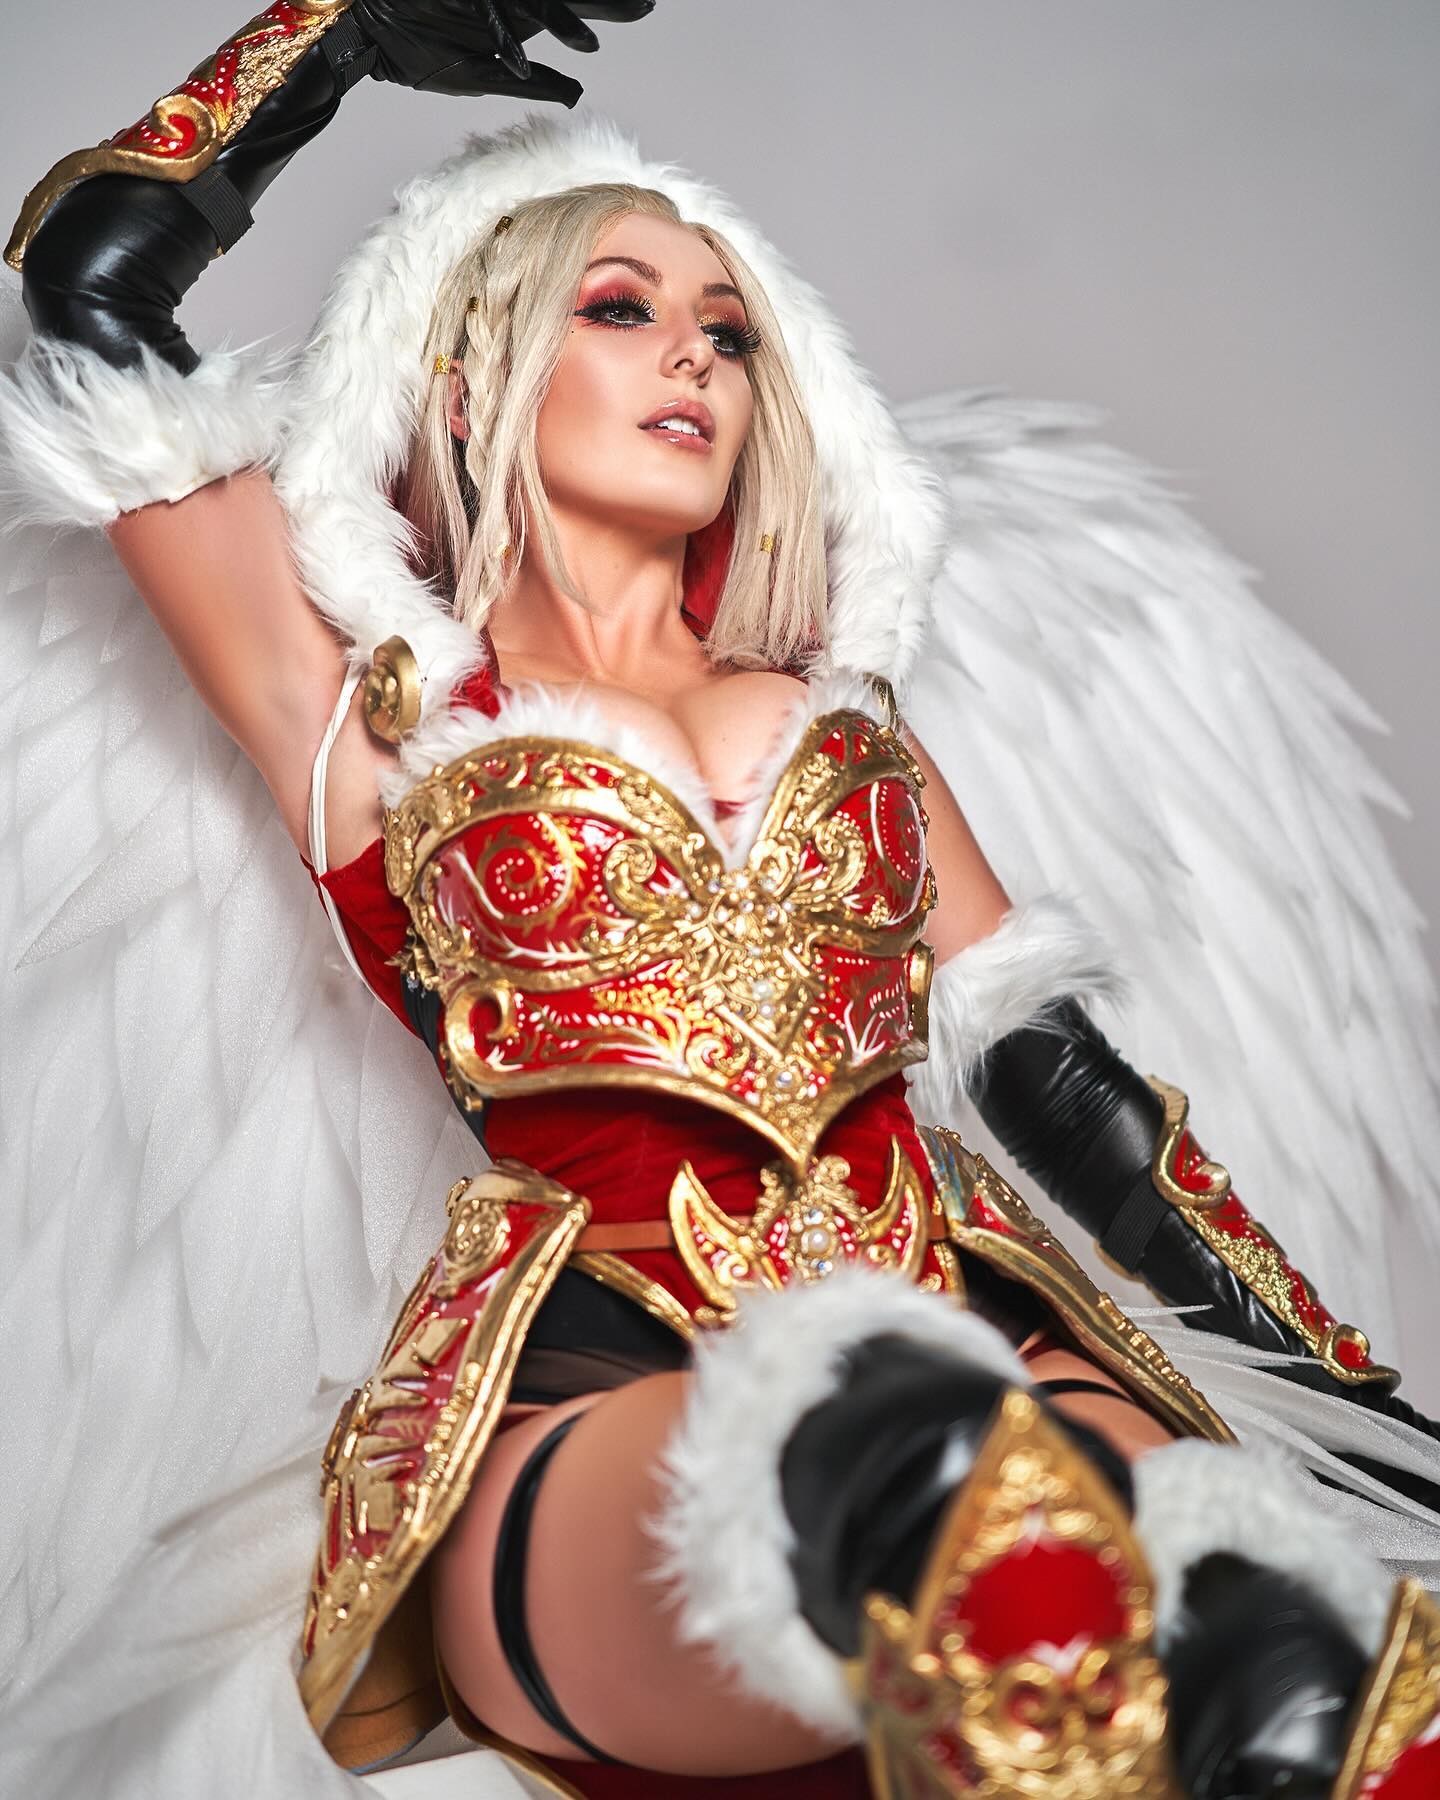 ✨ What are you doing for the holidays?? And which photo is your favorite?✨

.
.
Photos: @kaidozu + @itsrobbiestark 
Costume made by me! It’s my armored Elsa cosplay upcycled to HOLIDAY VIBES 
Wings provided by studio! 
Paintjob inspired by @candymakeupartist 
#worbla #evafoam #santaRmor #cosplayarmor #cosplay